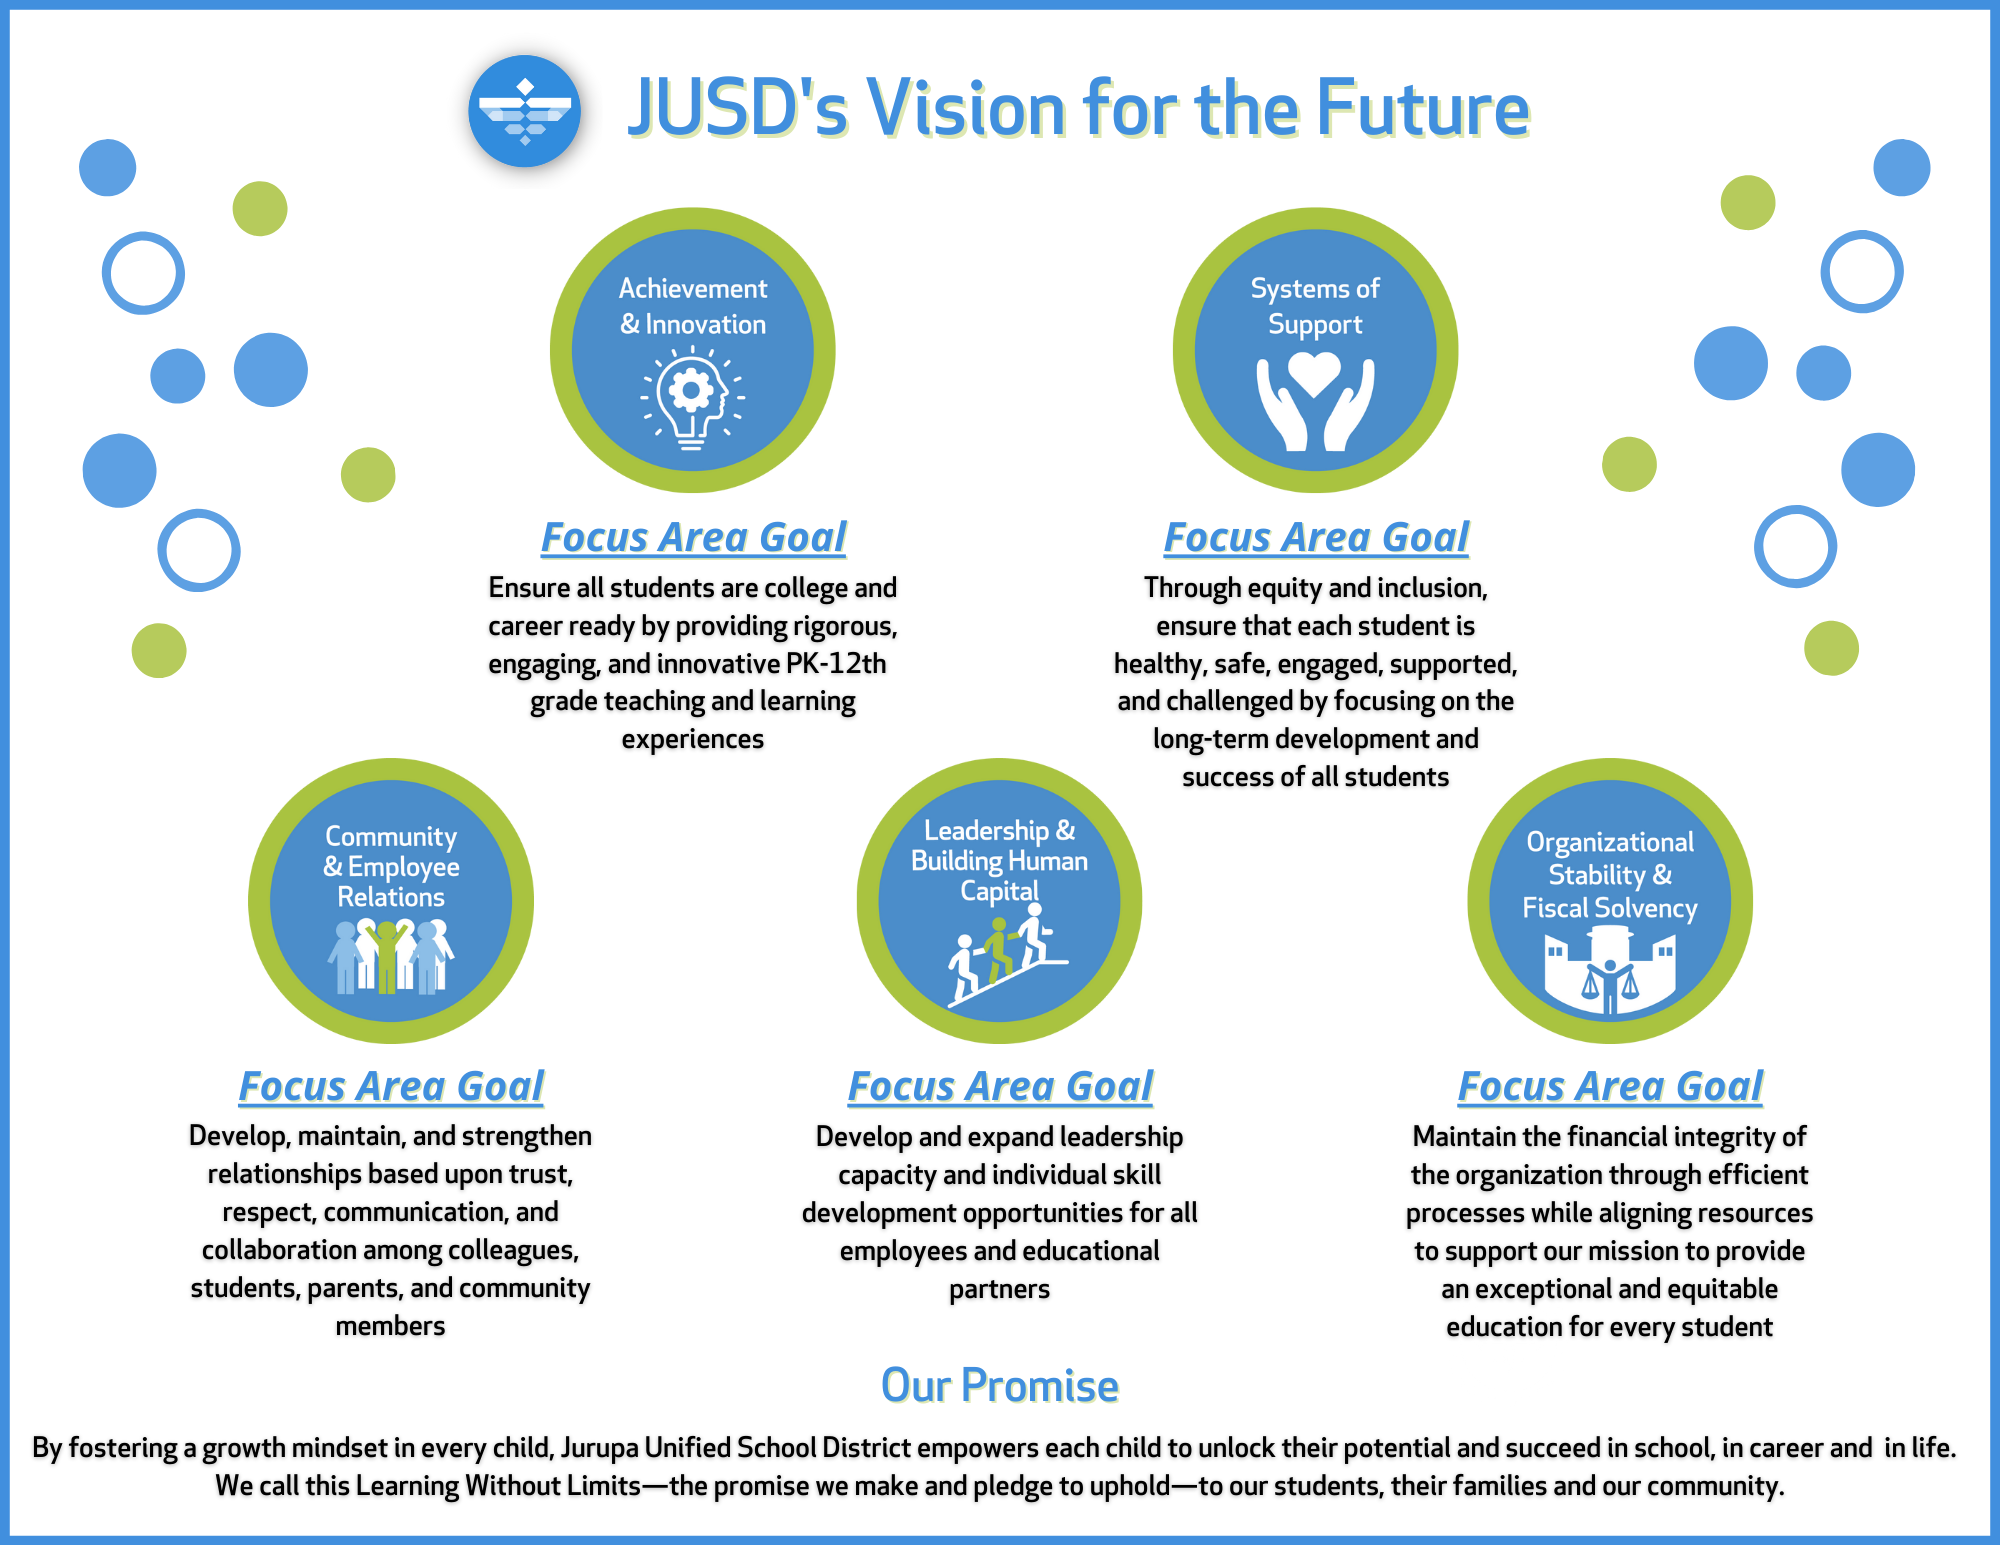 Vision for the Future in English